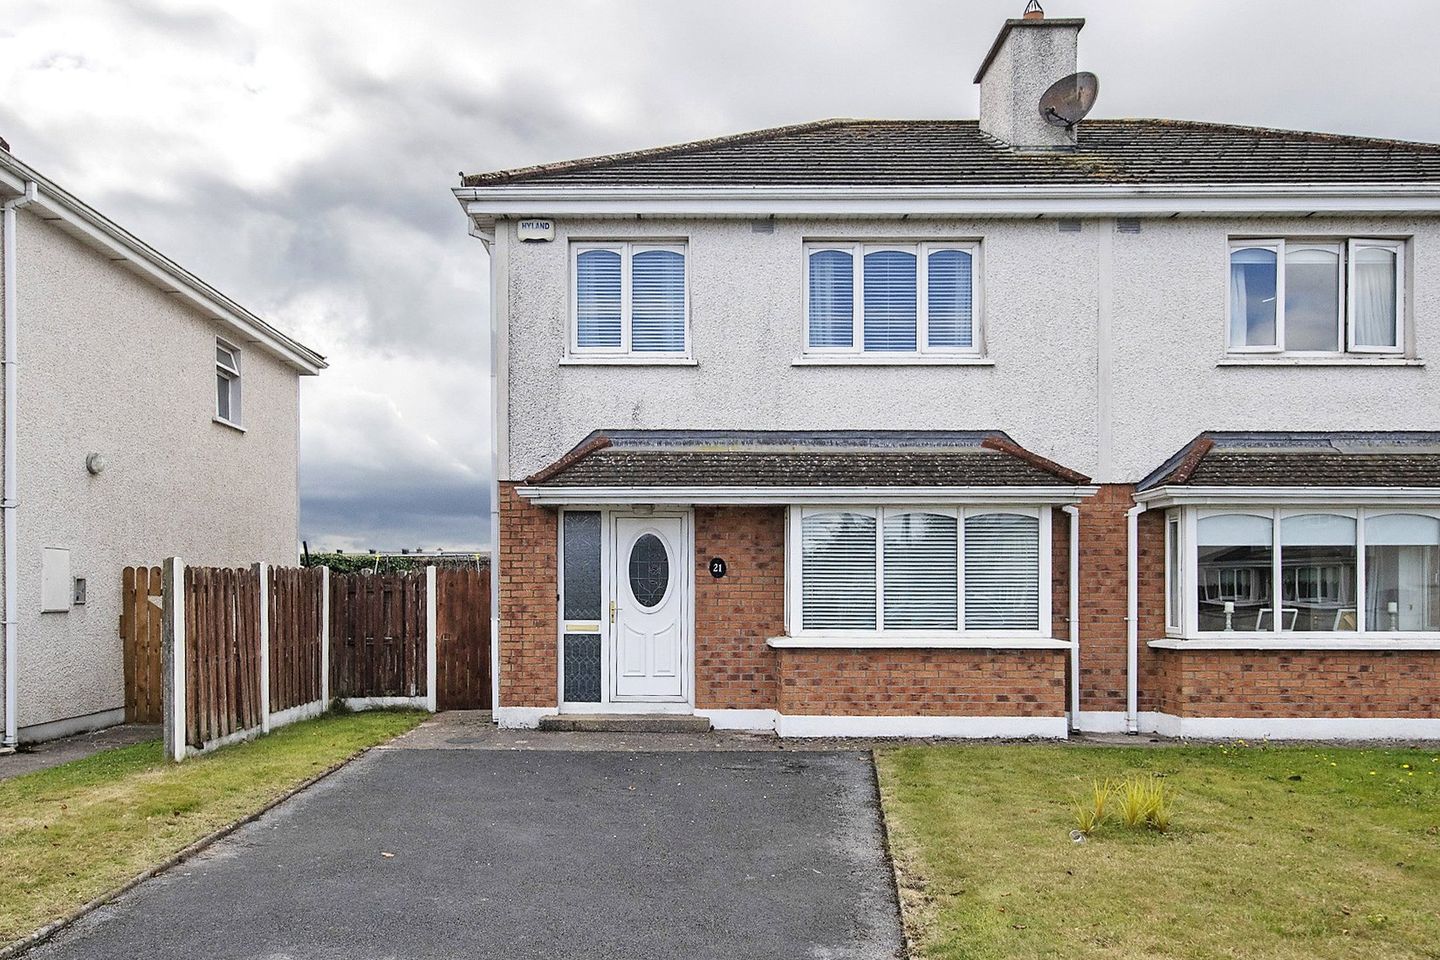 21 Willowbrook, Tallow, Co. Waterford